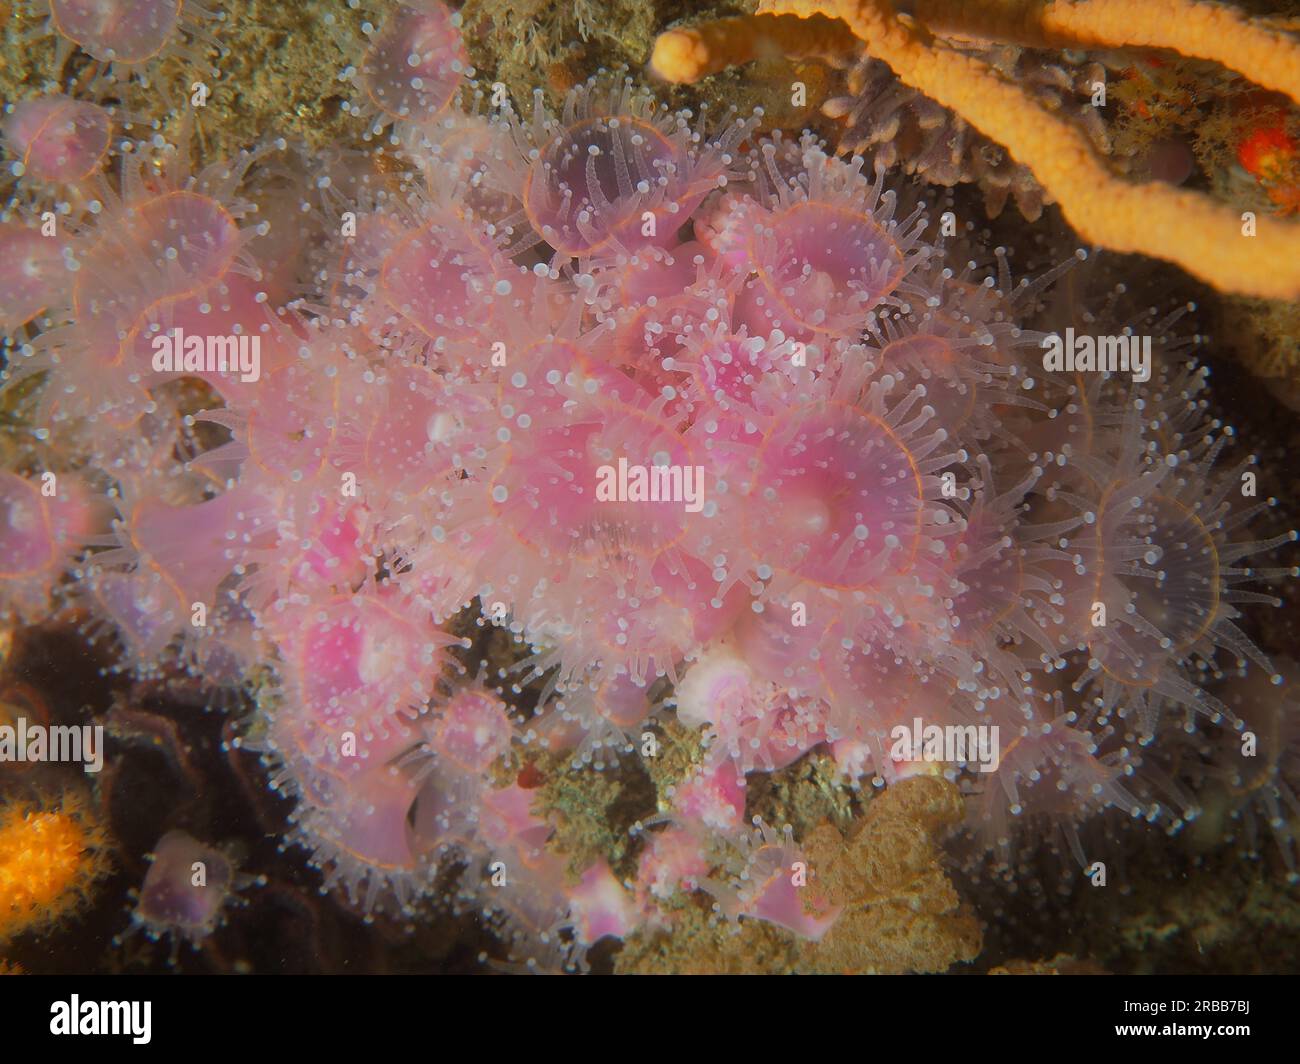 Strawberry anemone (Corynactis annulata), sea anemone, False Bay, Cape of Good Hope, Cape Town, South Africa Stock Photo